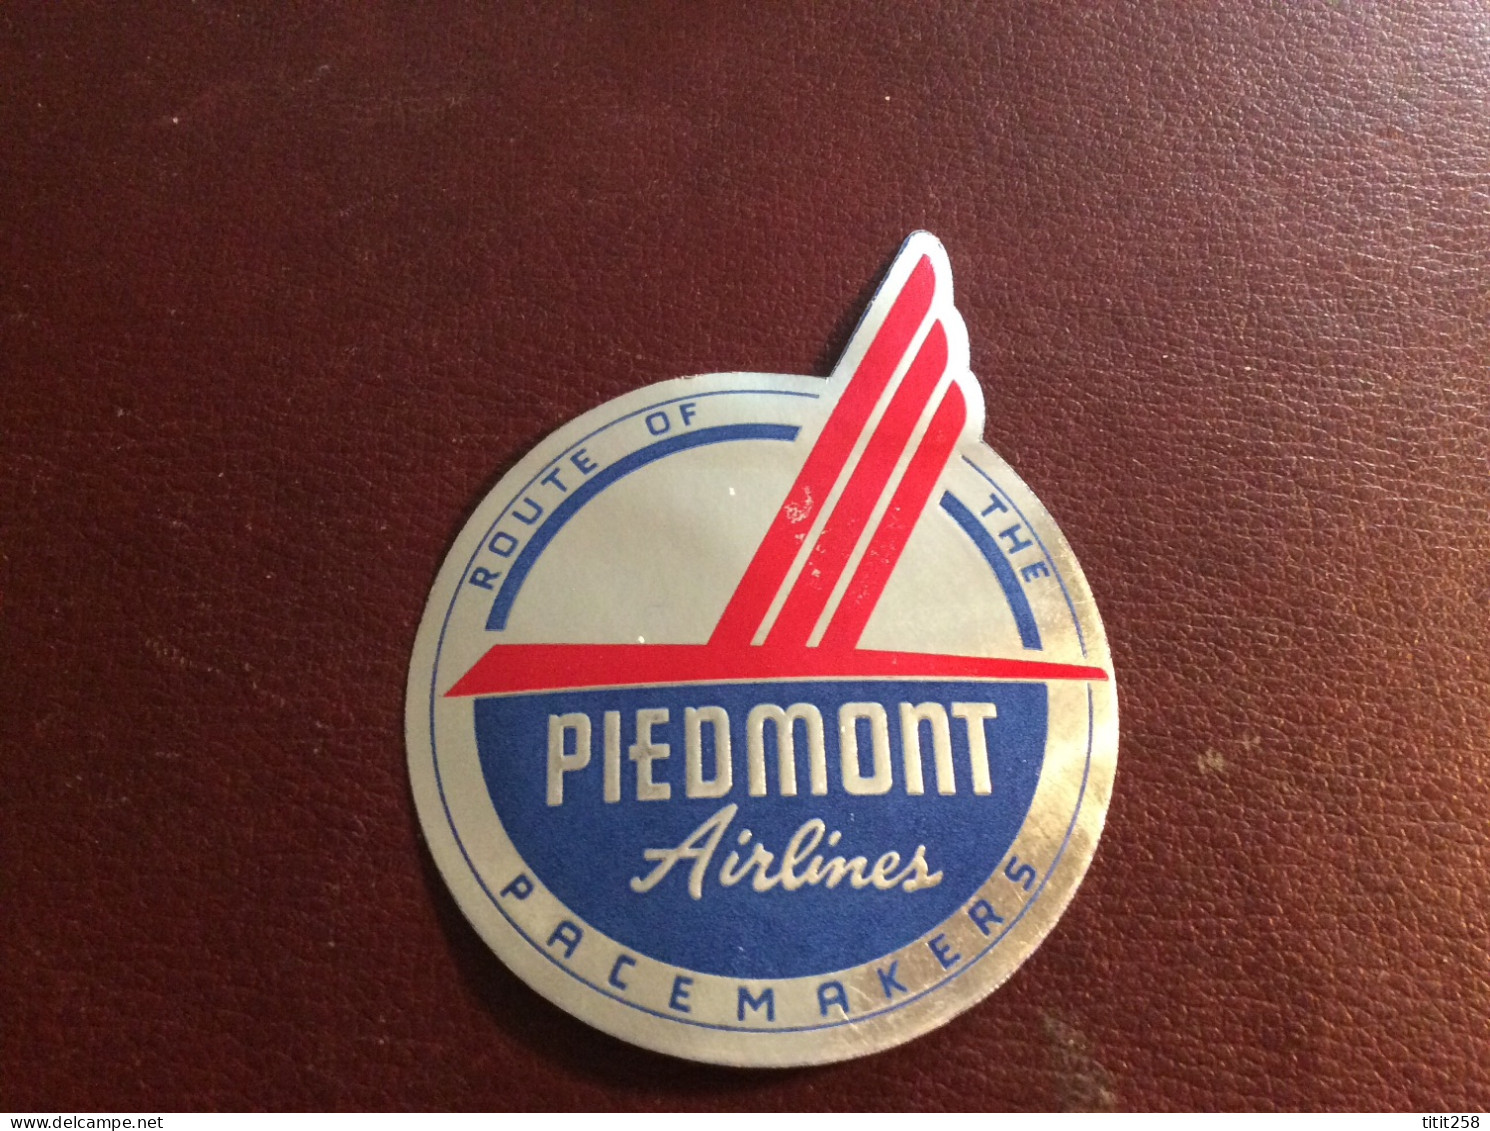 PIEDMONT AIRLINES ROUTE OF THE / PACEMAKERS  ( Avions Aéroports ) - Baggage Labels & Tags